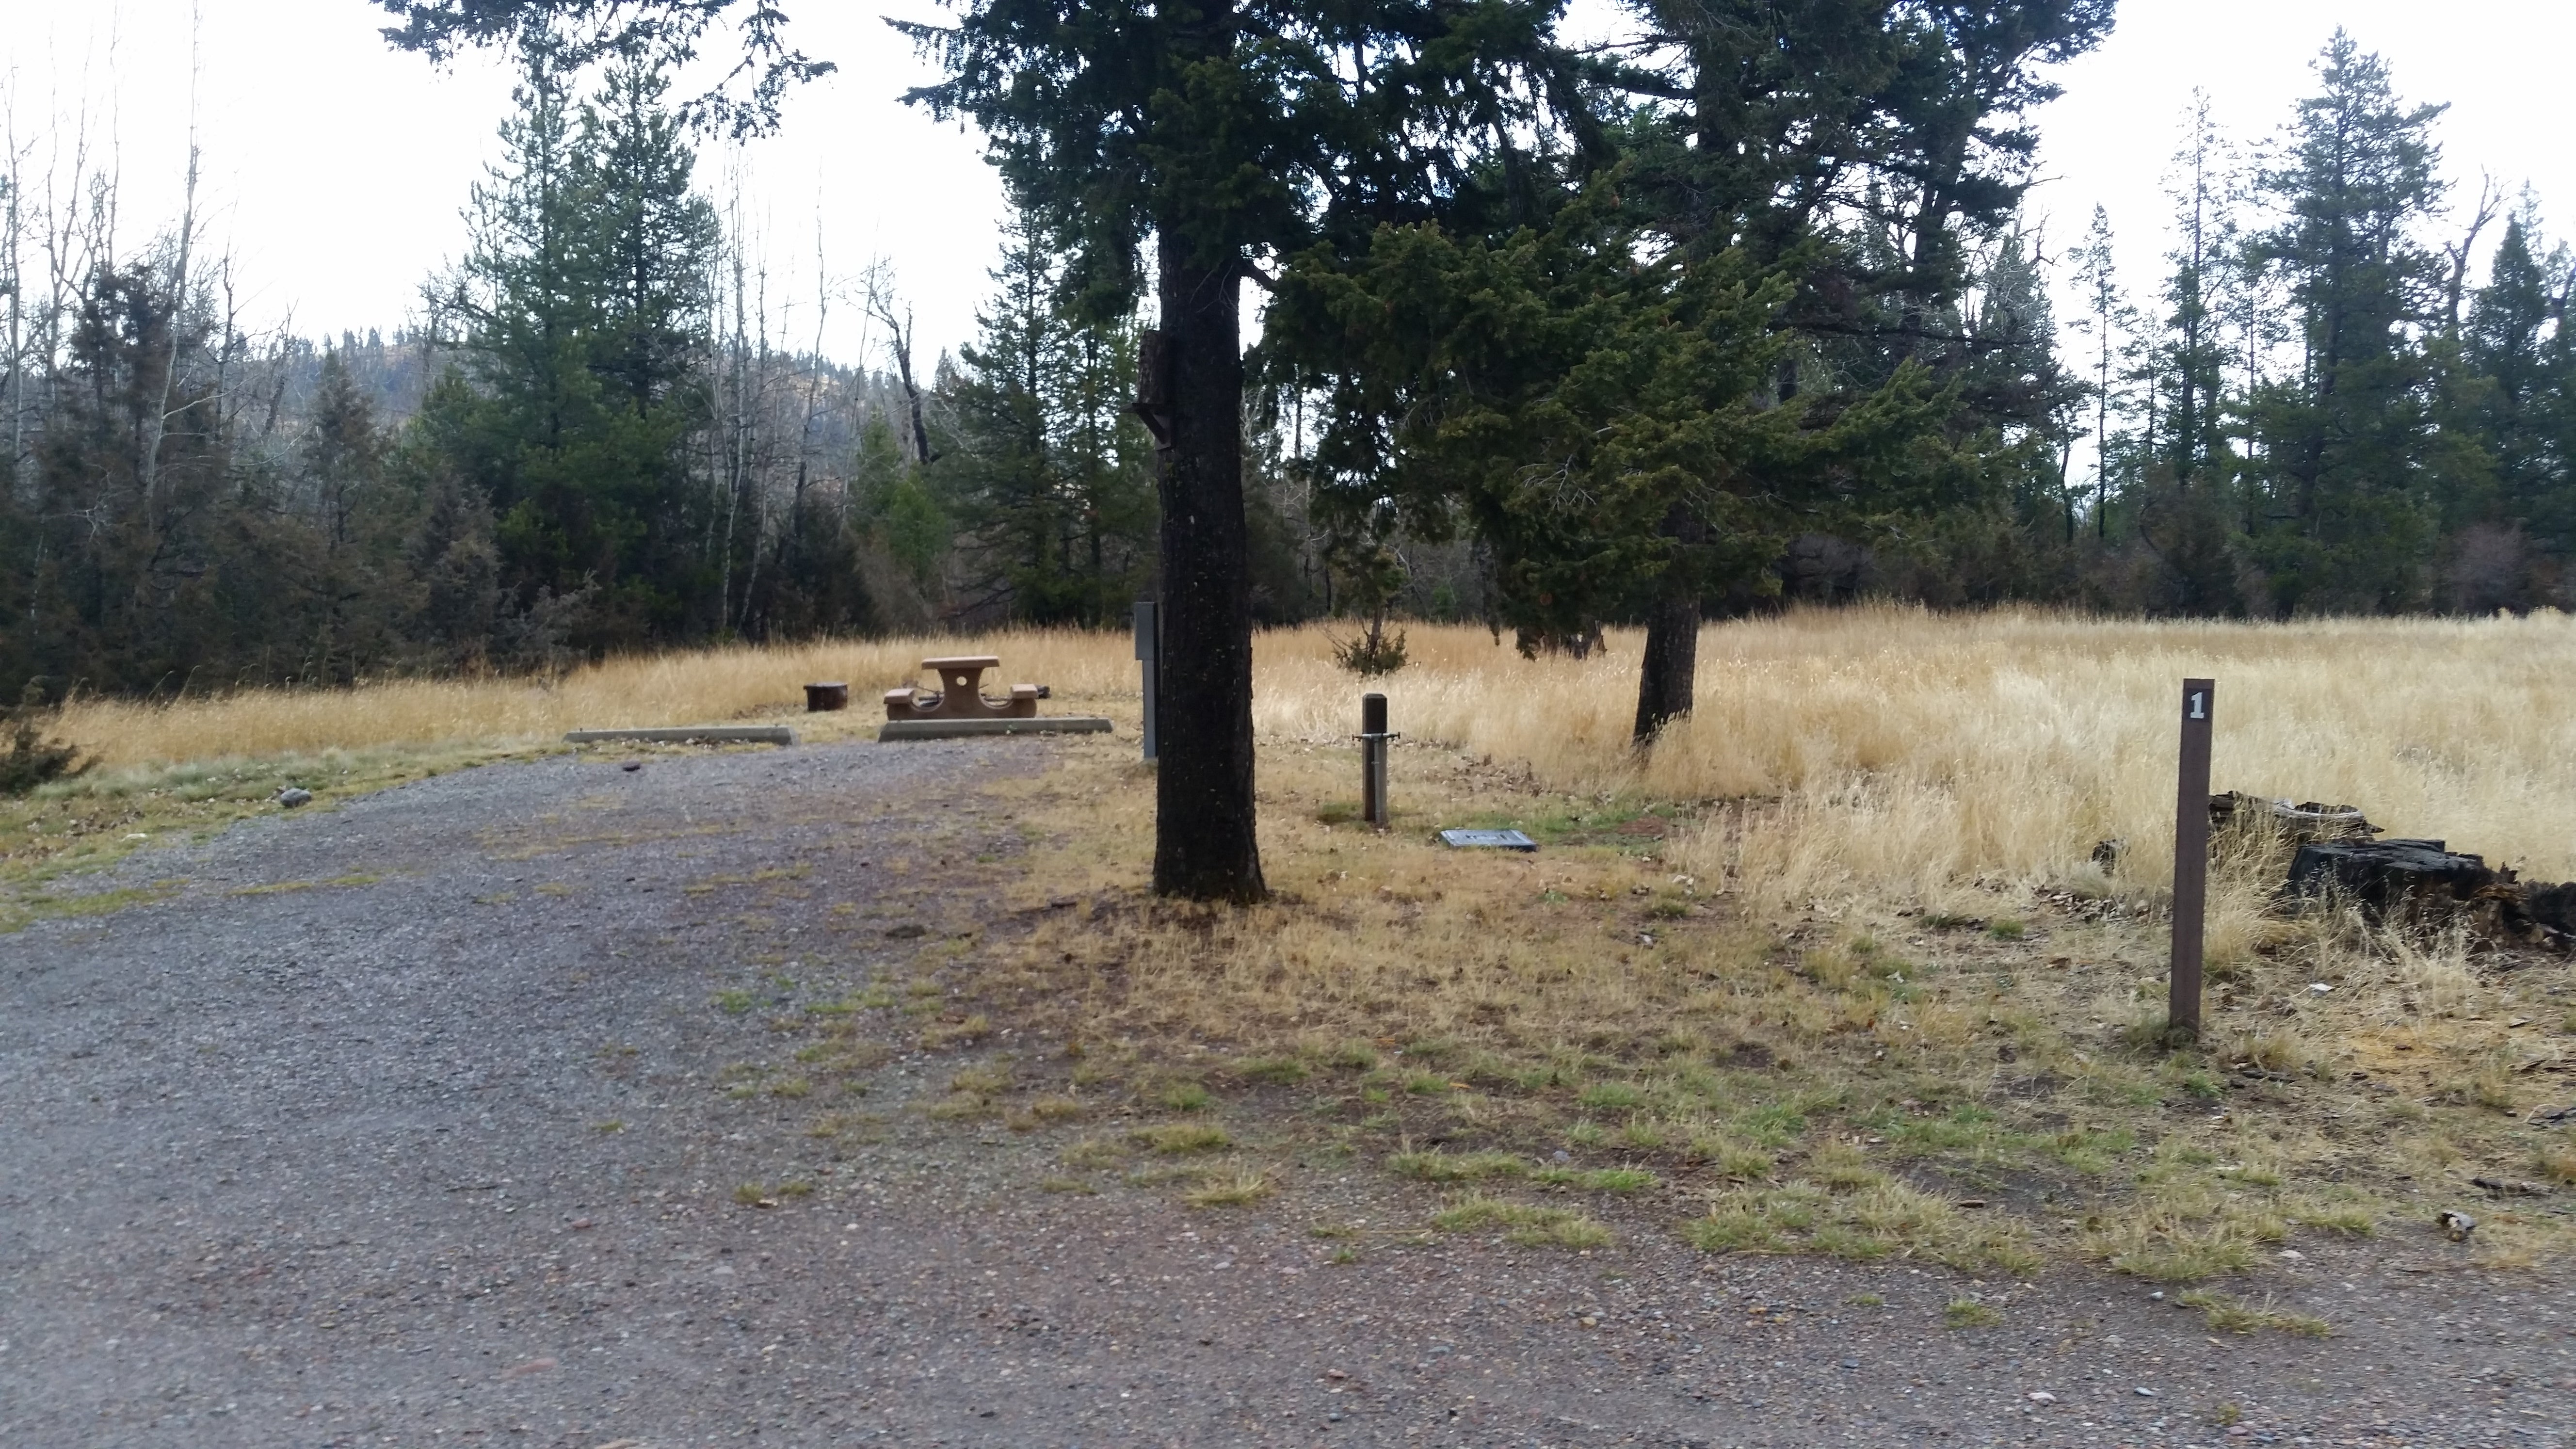 Camper submitted image from Aspen Grove Campground - 3